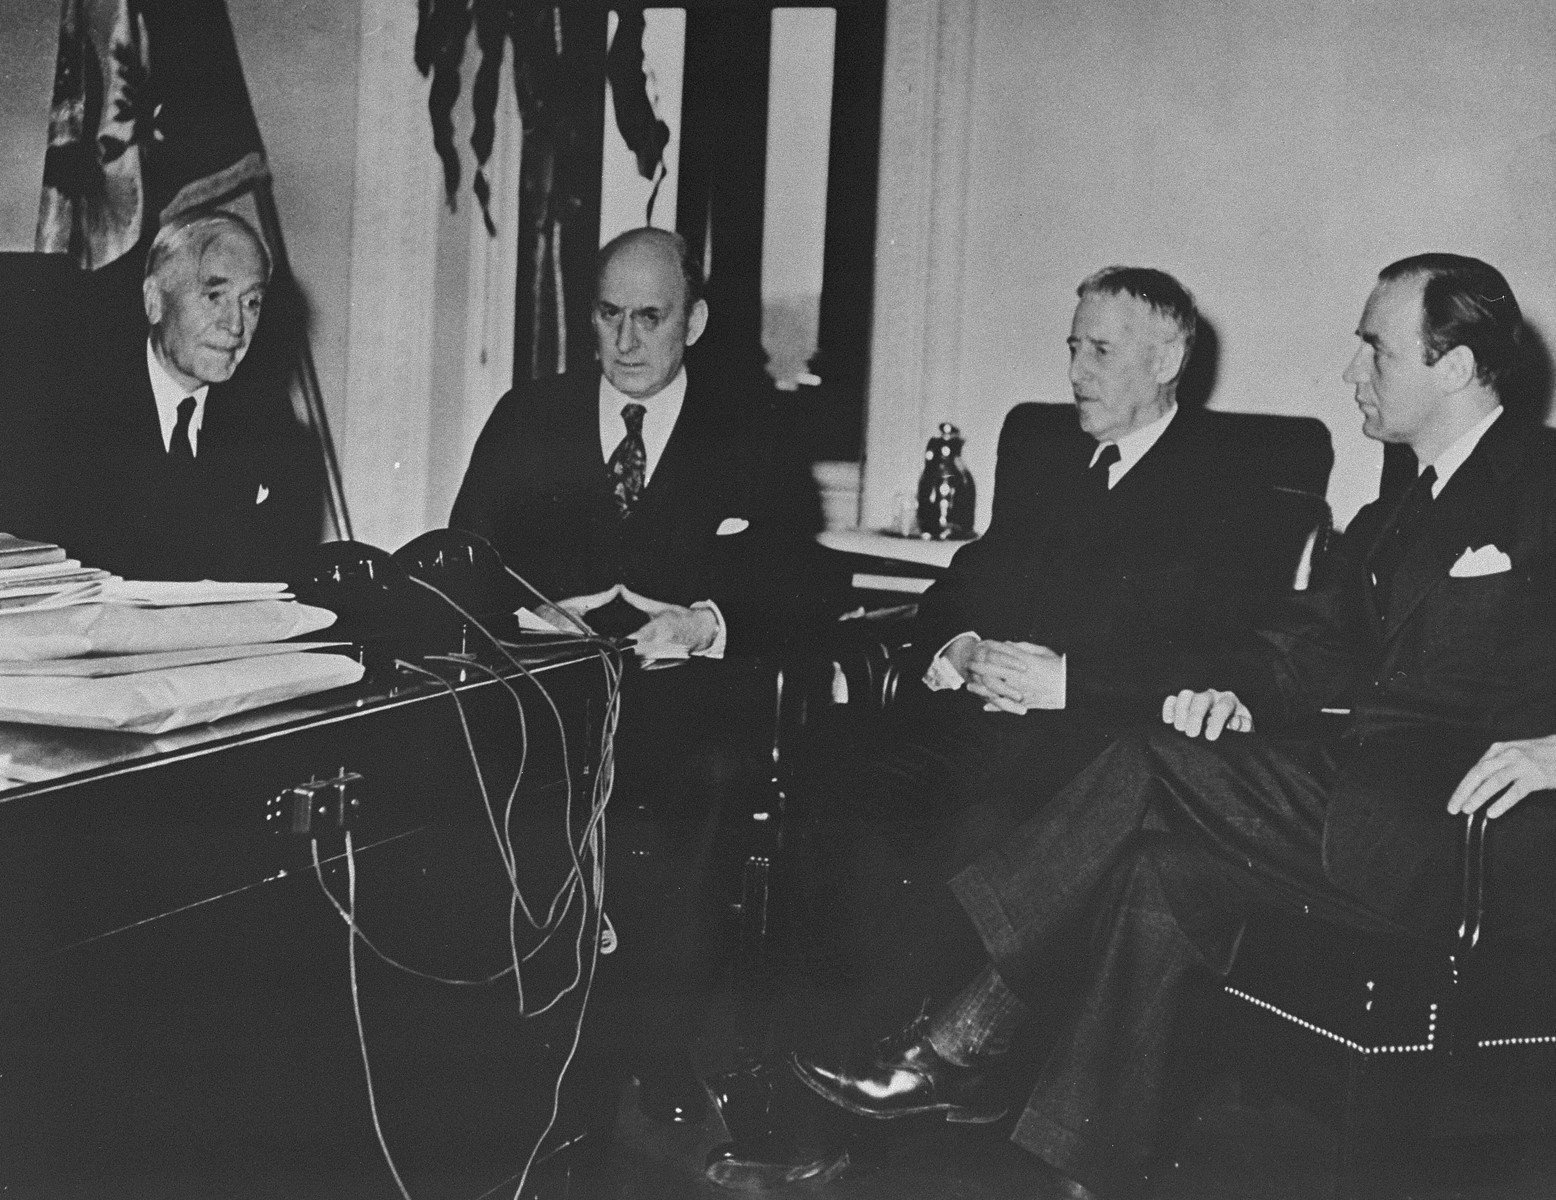 Third meeting of the Board of Directors of the War Refugee Board in the office of Secretary of State Cordell Hull. 

Pictured from left to right are: Cordell Hull, Henry Morgenthau, Henry L. Stimson, and John Pehle, Executive Director.